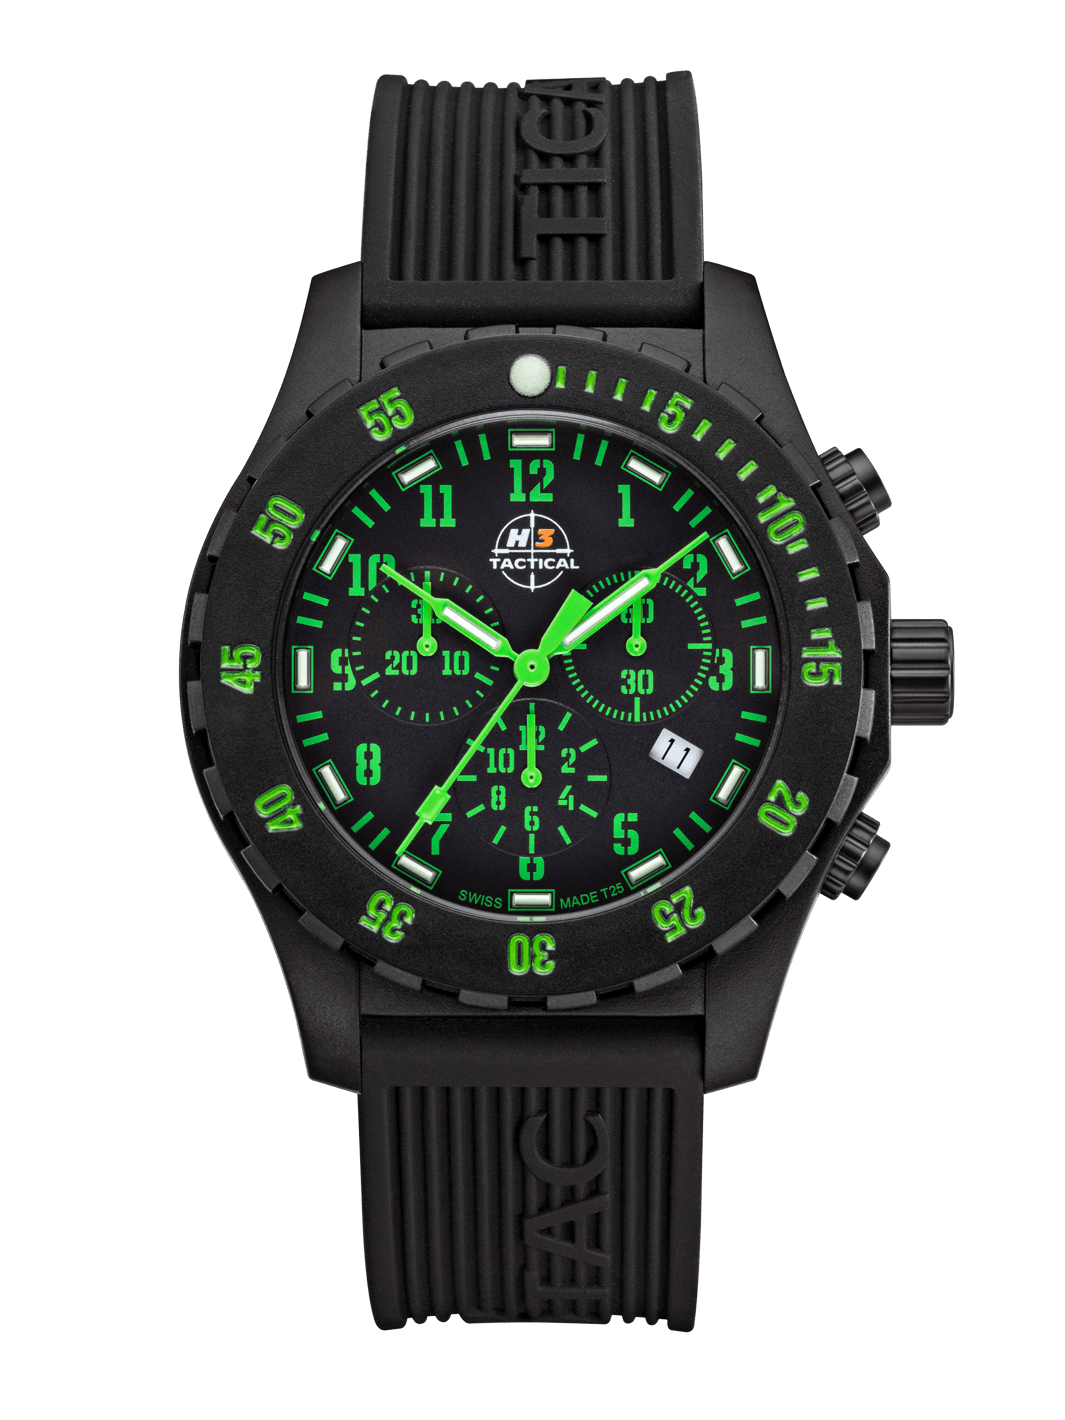 H3TACTICAL Trooper Carbon Green Chronograph H3 Uhr mit Silikonband